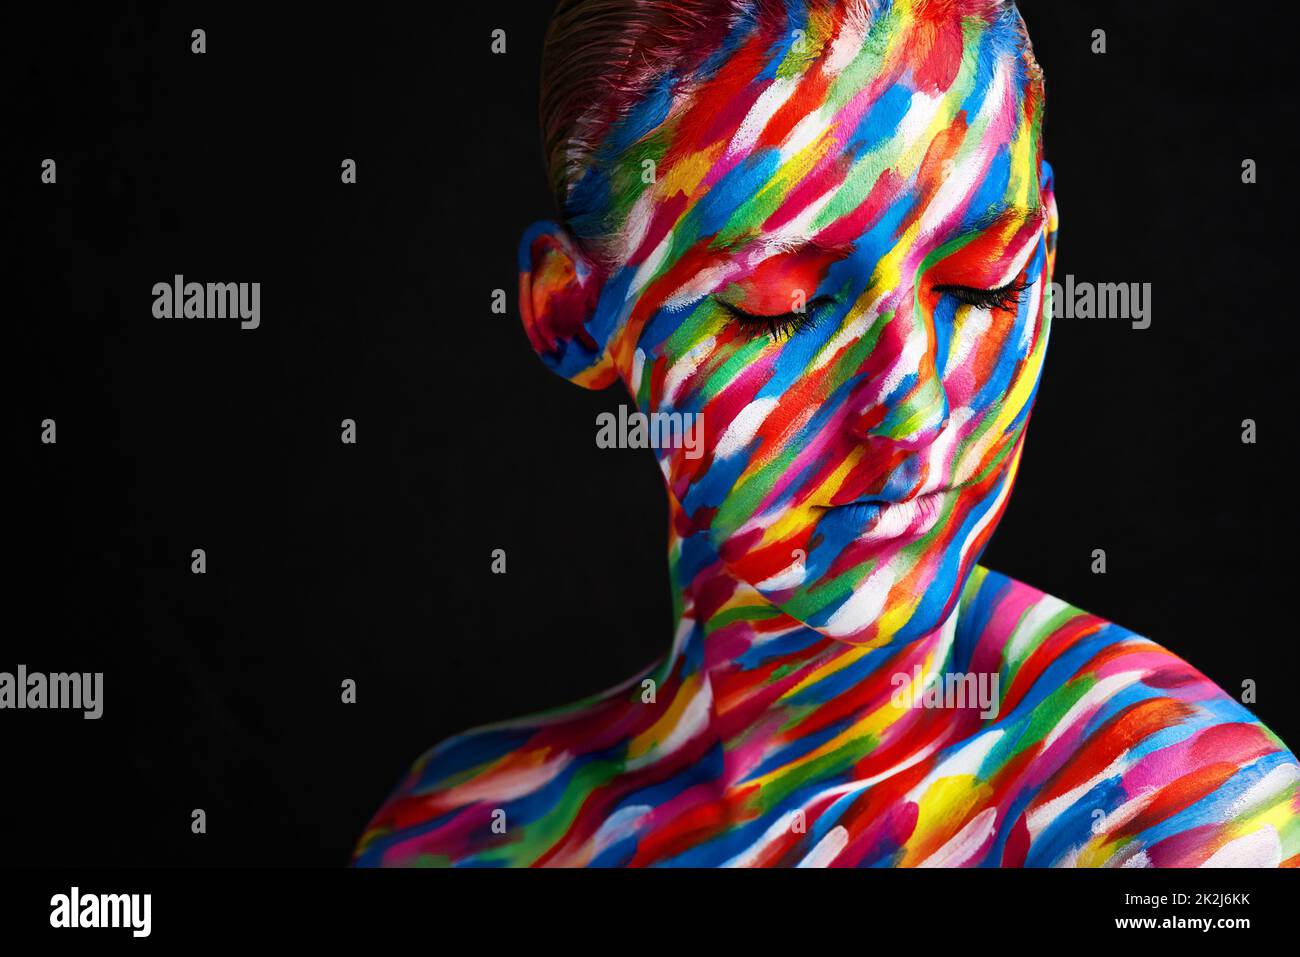 She looks good in every color. Studio shot of a young woman posing with brightly colored paint on her face against a black background. Stock Photo